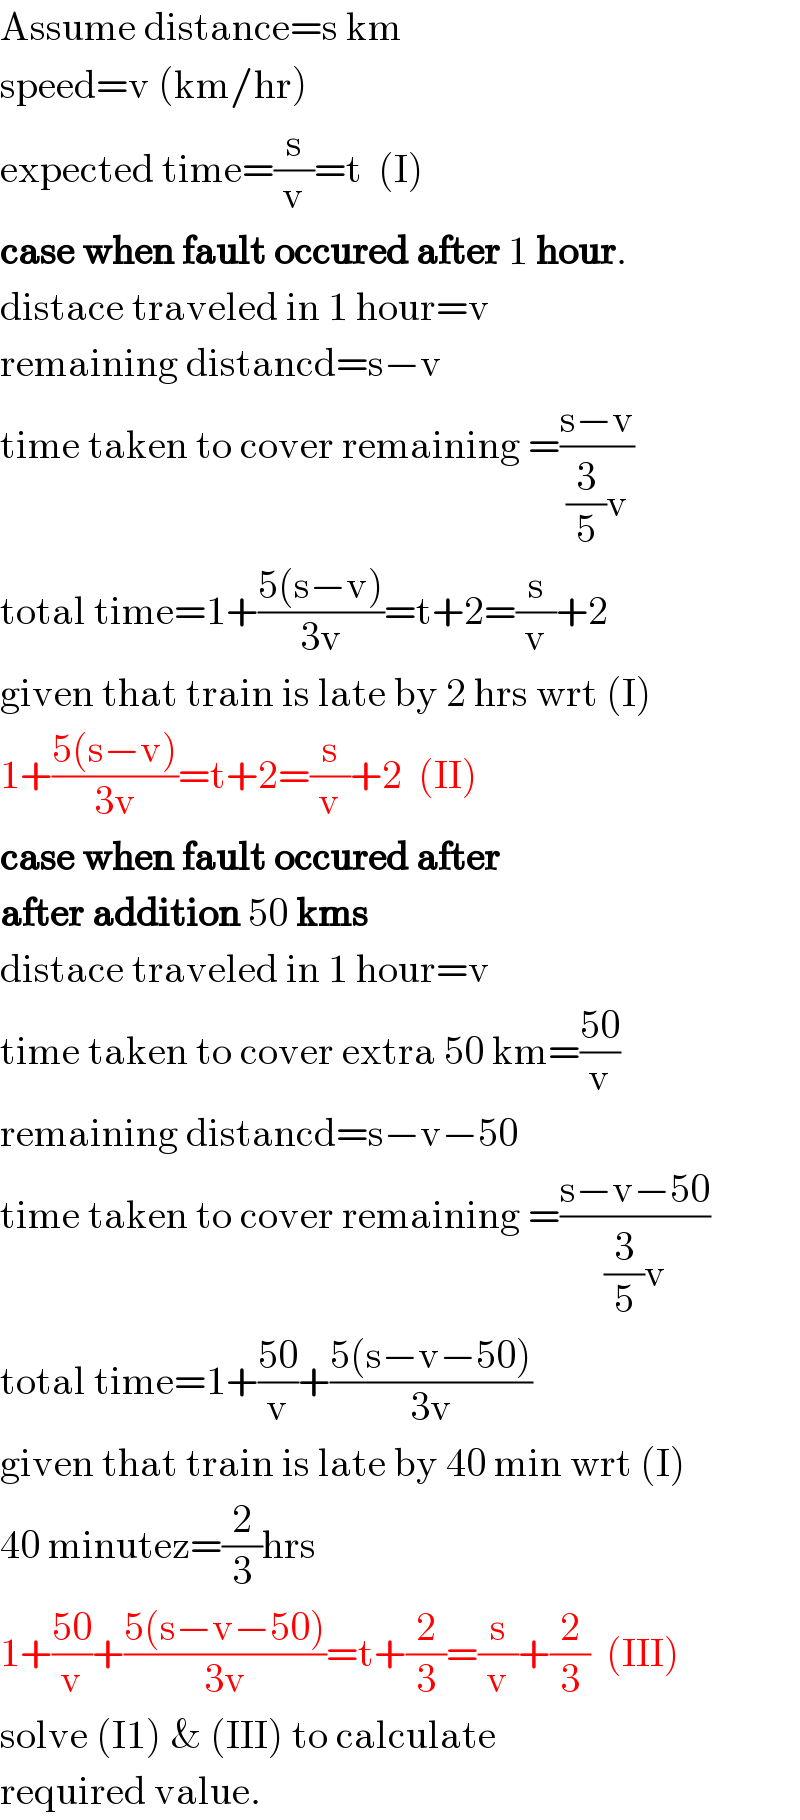 Assume distance=s km  speed=v (km/hr)  expected time=(s/v)=t  (I)  case when fault occured after 1 hour.  distace traveled in 1 hour=v  remaining distancd=s−v  time taken to cover remaining =((s−v)/((3/5)v))  total time=1+((5(s−v))/(3v))=t+2=(s/v)+2  given that train is late by 2 hrs wrt (I)  1+((5(s−v))/(3v))=t+2=(s/v)+2  (II)  case when fault occured after   after addition 50 kms  distace traveled in 1 hour=v  time taken to cover extra 50 km=((50)/v)  remaining distancd=s−v−50  time taken to cover remaining =((s−v−50)/((3/5)v))  total time=1+((50)/v)+((5(s−v−50))/(3v))  given that train is late by 40 min wrt (I)  40 minutez=(2/3)hrs  1+((50)/v)+((5(s−v−50))/(3v))=t+(2/3)=(s/v)+(2/3)  (III)  solve (I1) & (III) to calculate  required value.  